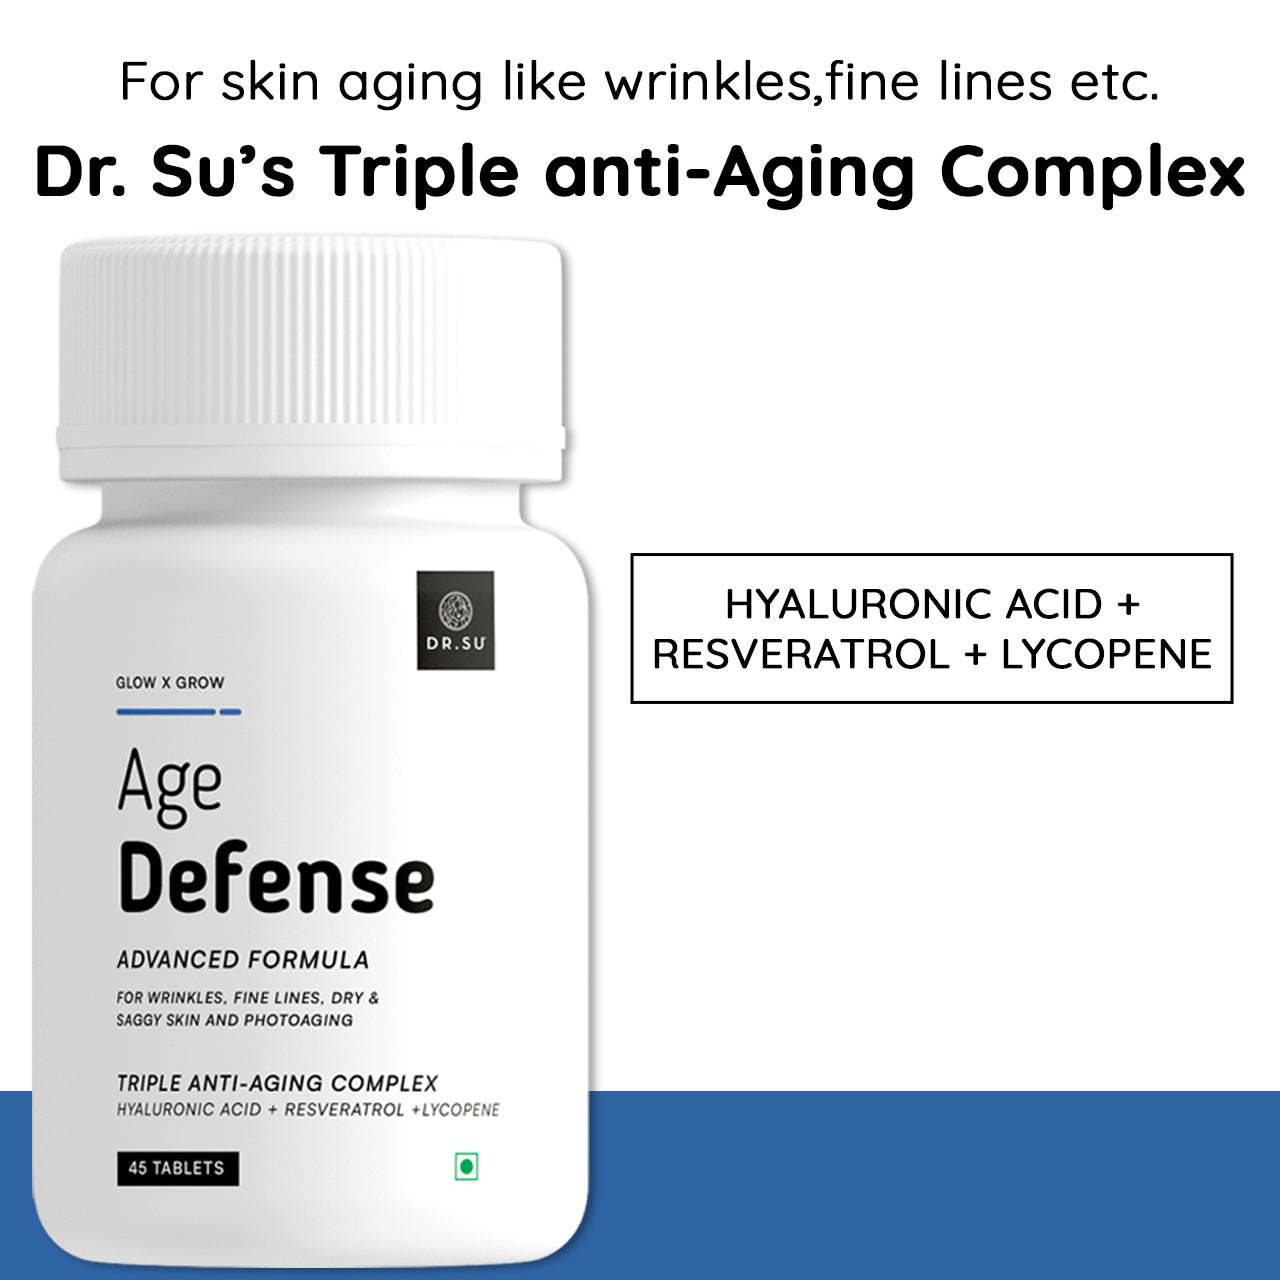 Dr. Su Age Defense with Hyaluronic Acids